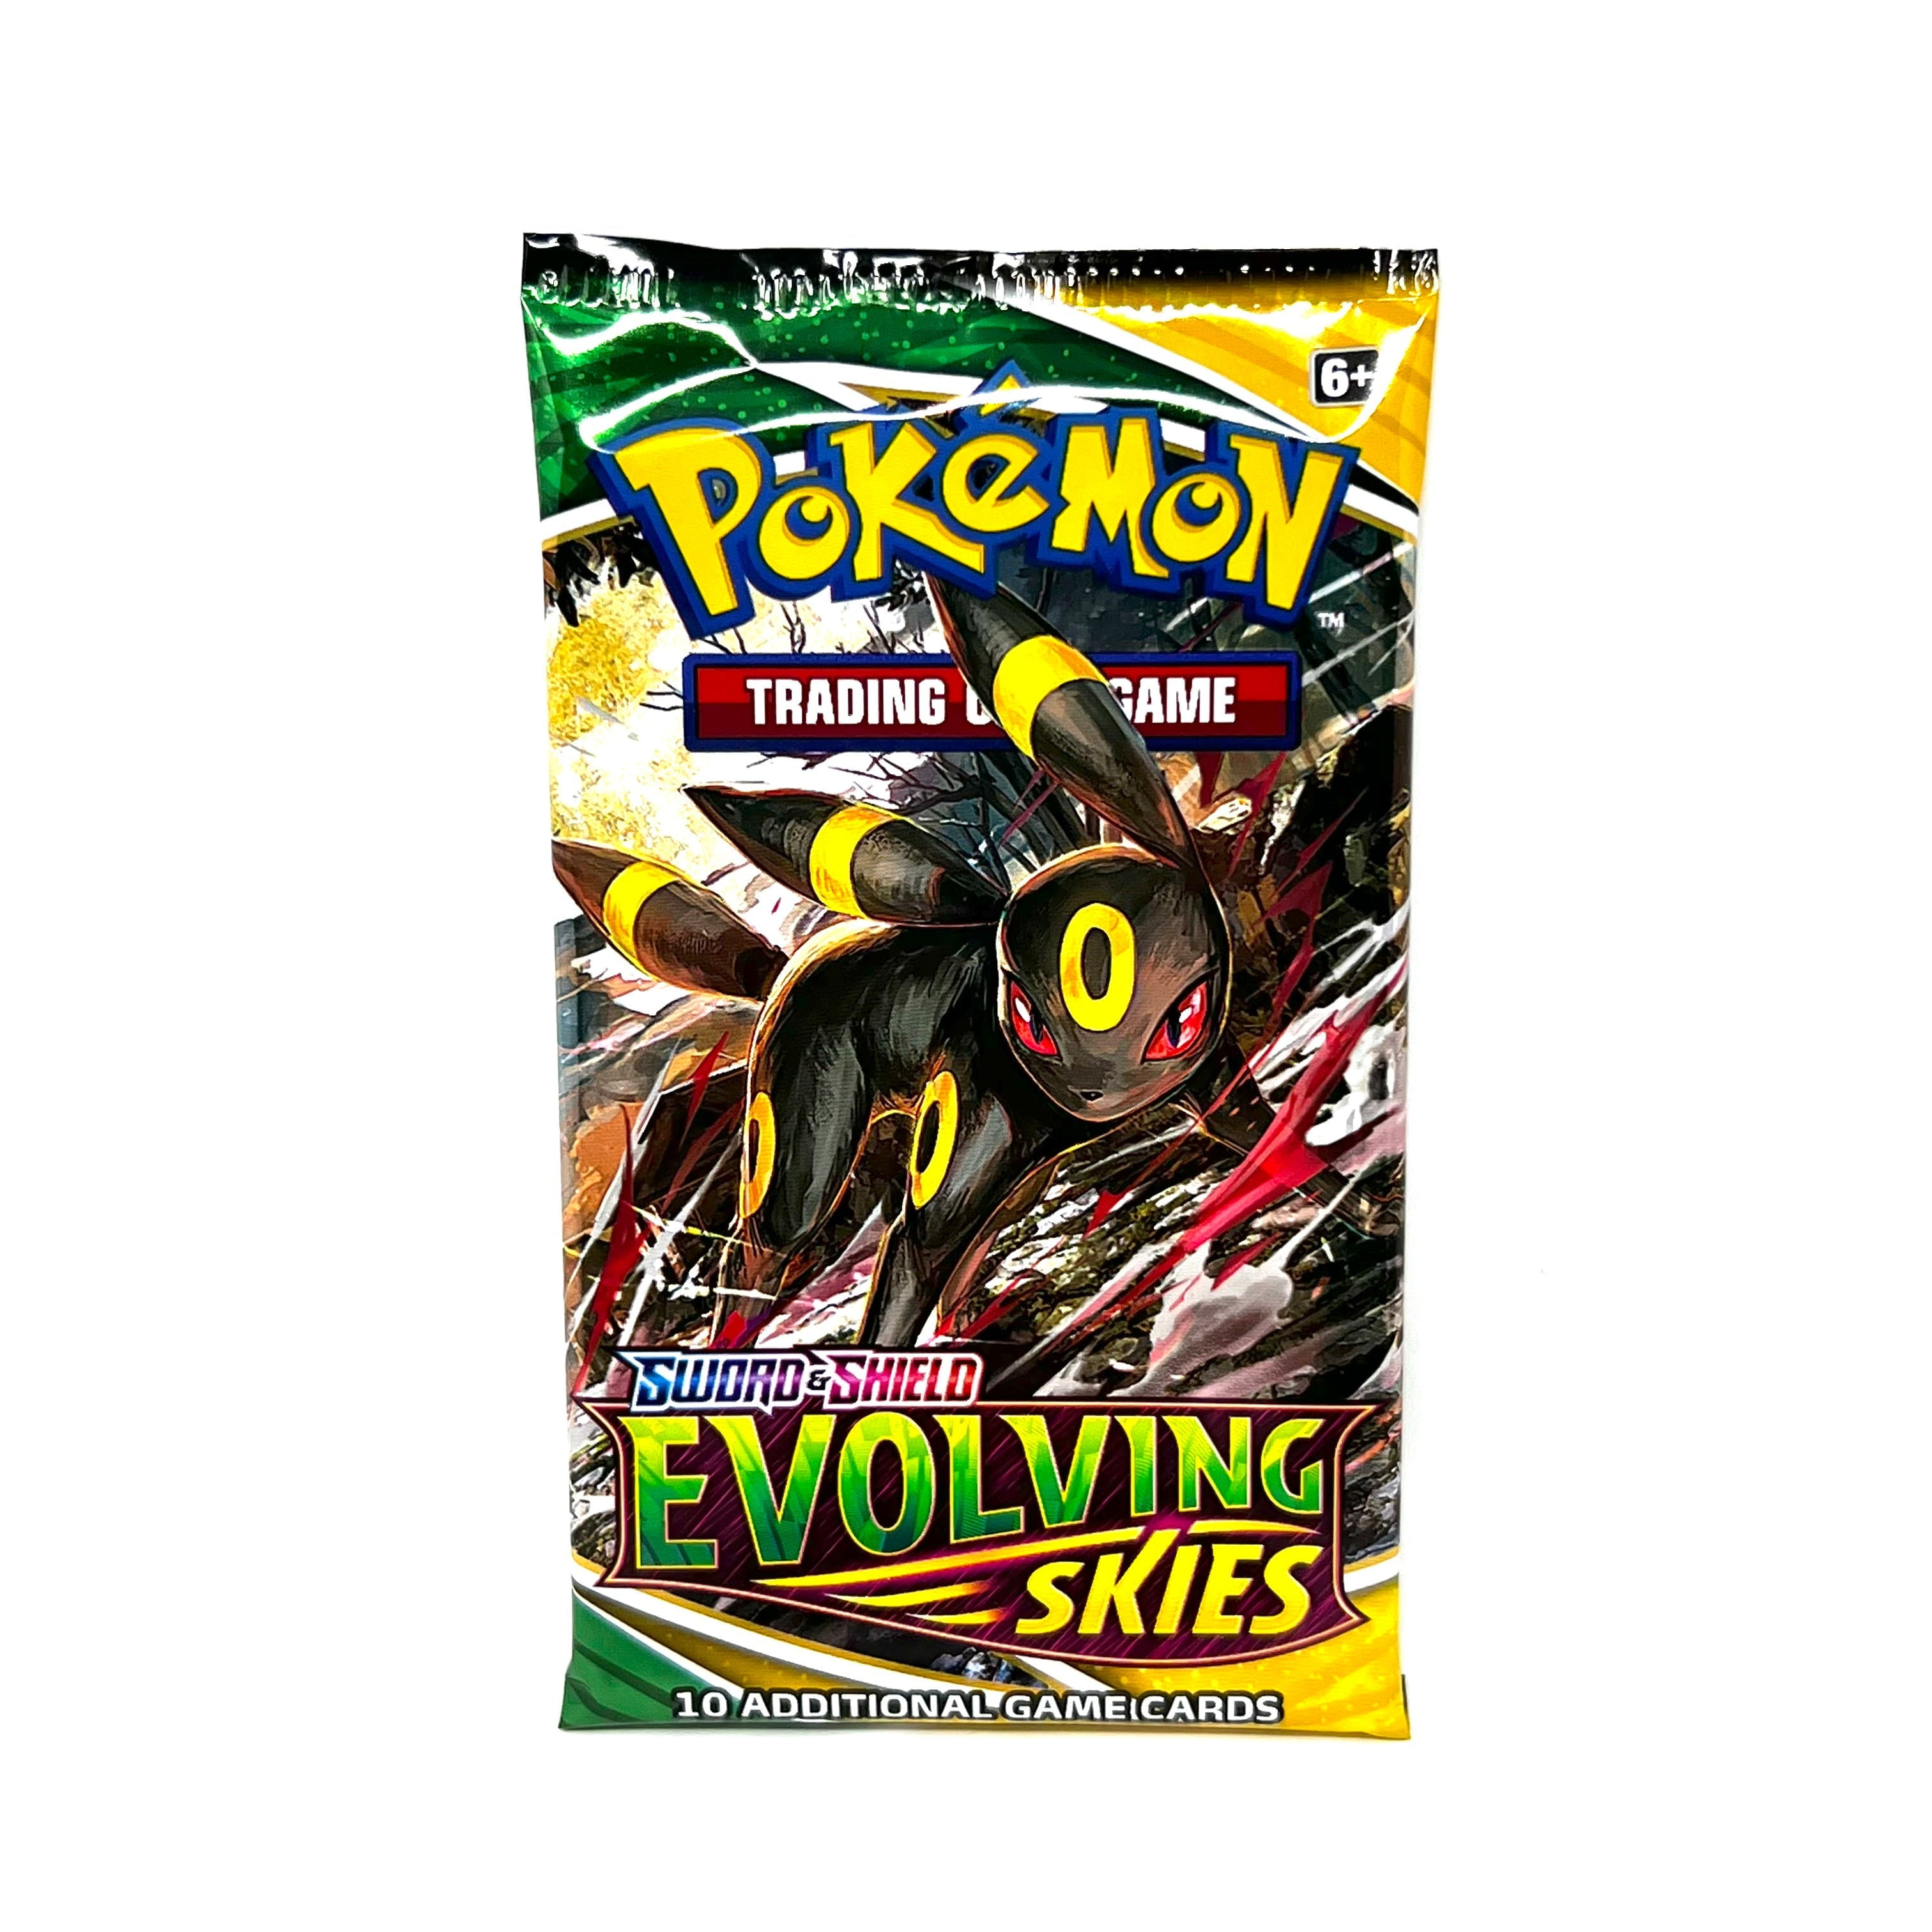 Pokemon Sword and Shield (swsh) Single Booster Pack Evolving Skies, Size: Small